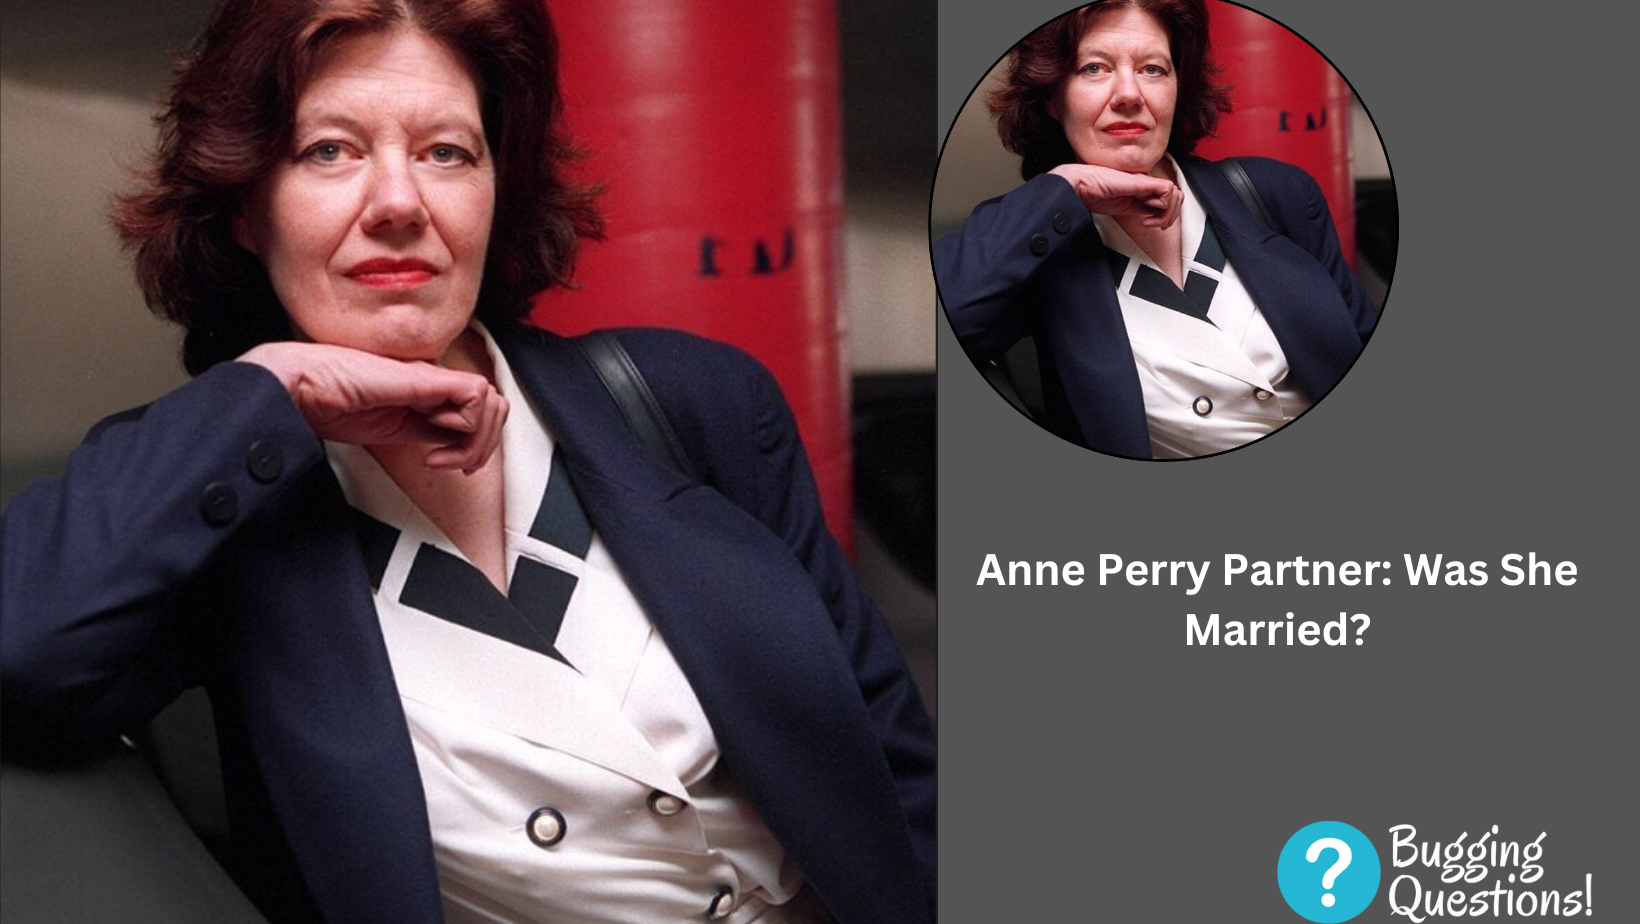 Anne Perry Partner: Was She Married?